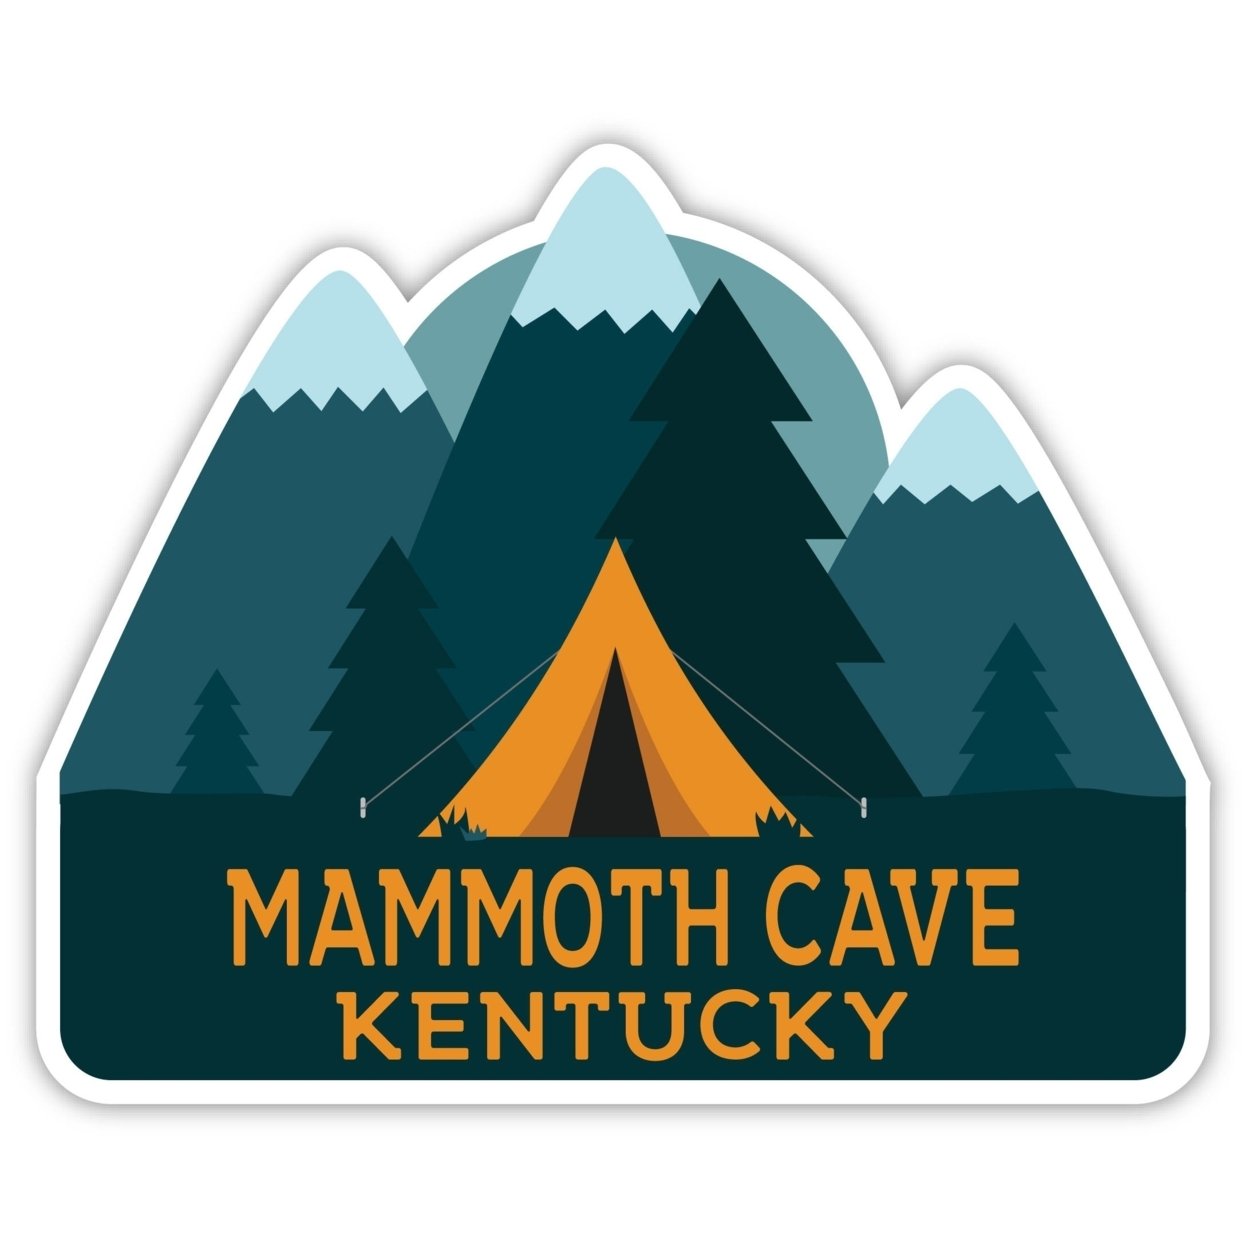 Mammoth Cave Kentucky Souvenir Decorative Stickers (Choose Theme And Size) - 4-Inch, Great Outdoors